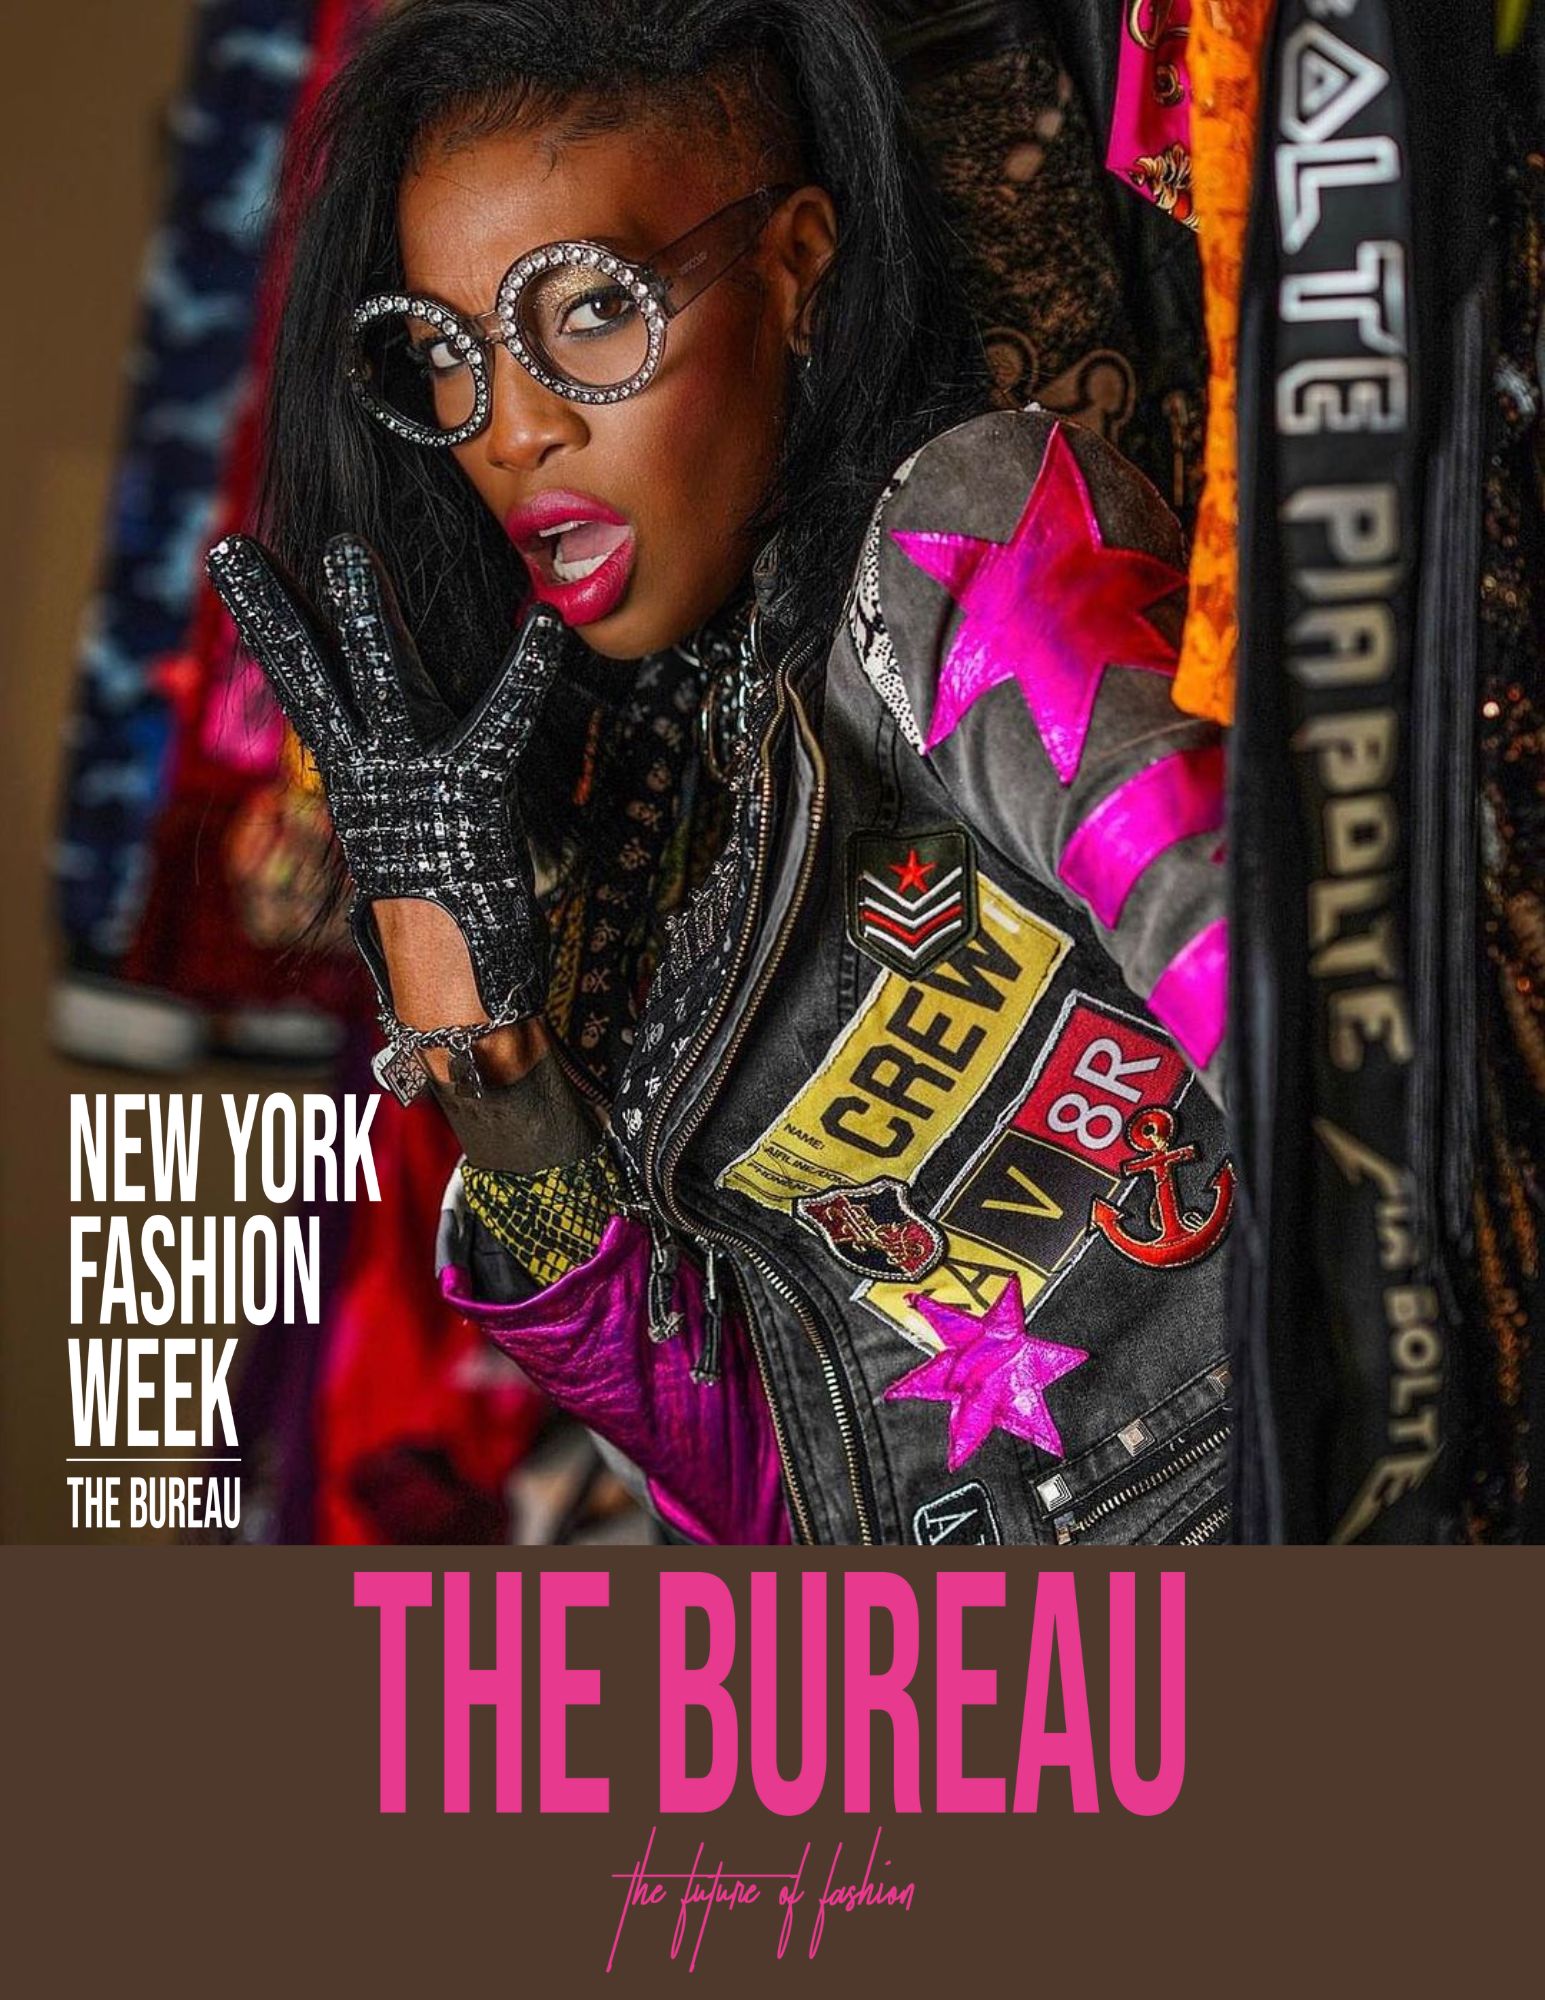 Owner of the Bureau Fashion Week Speaks Out on All the Craziness at His ...